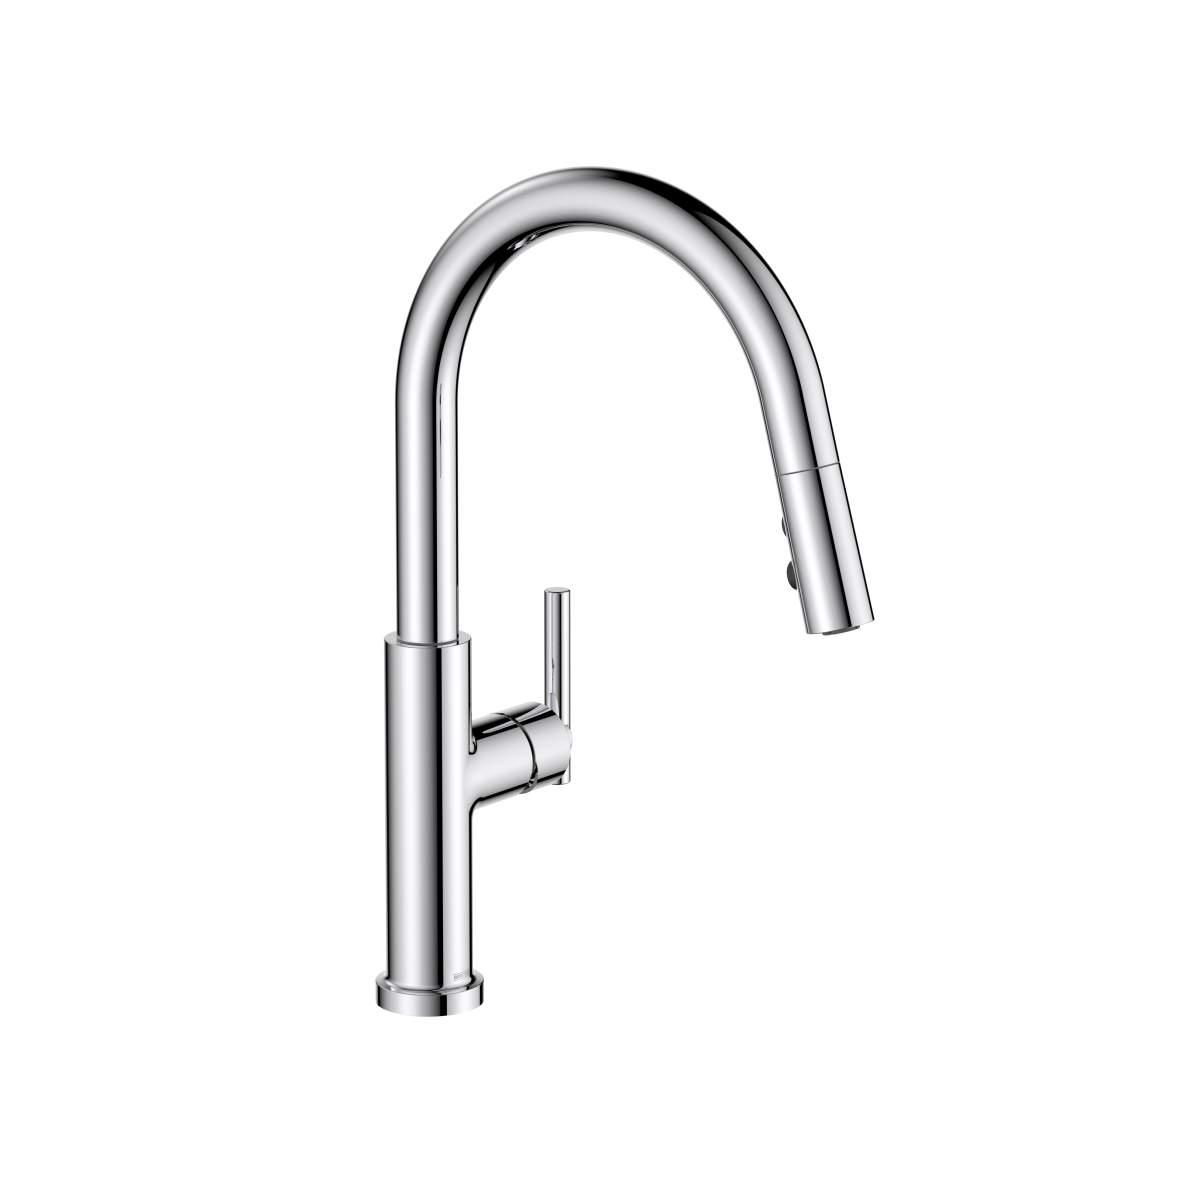 Bristan Jule Sink Mixer with Pull-Out Extending Hose and Eco Start (JU PULLSNK C)